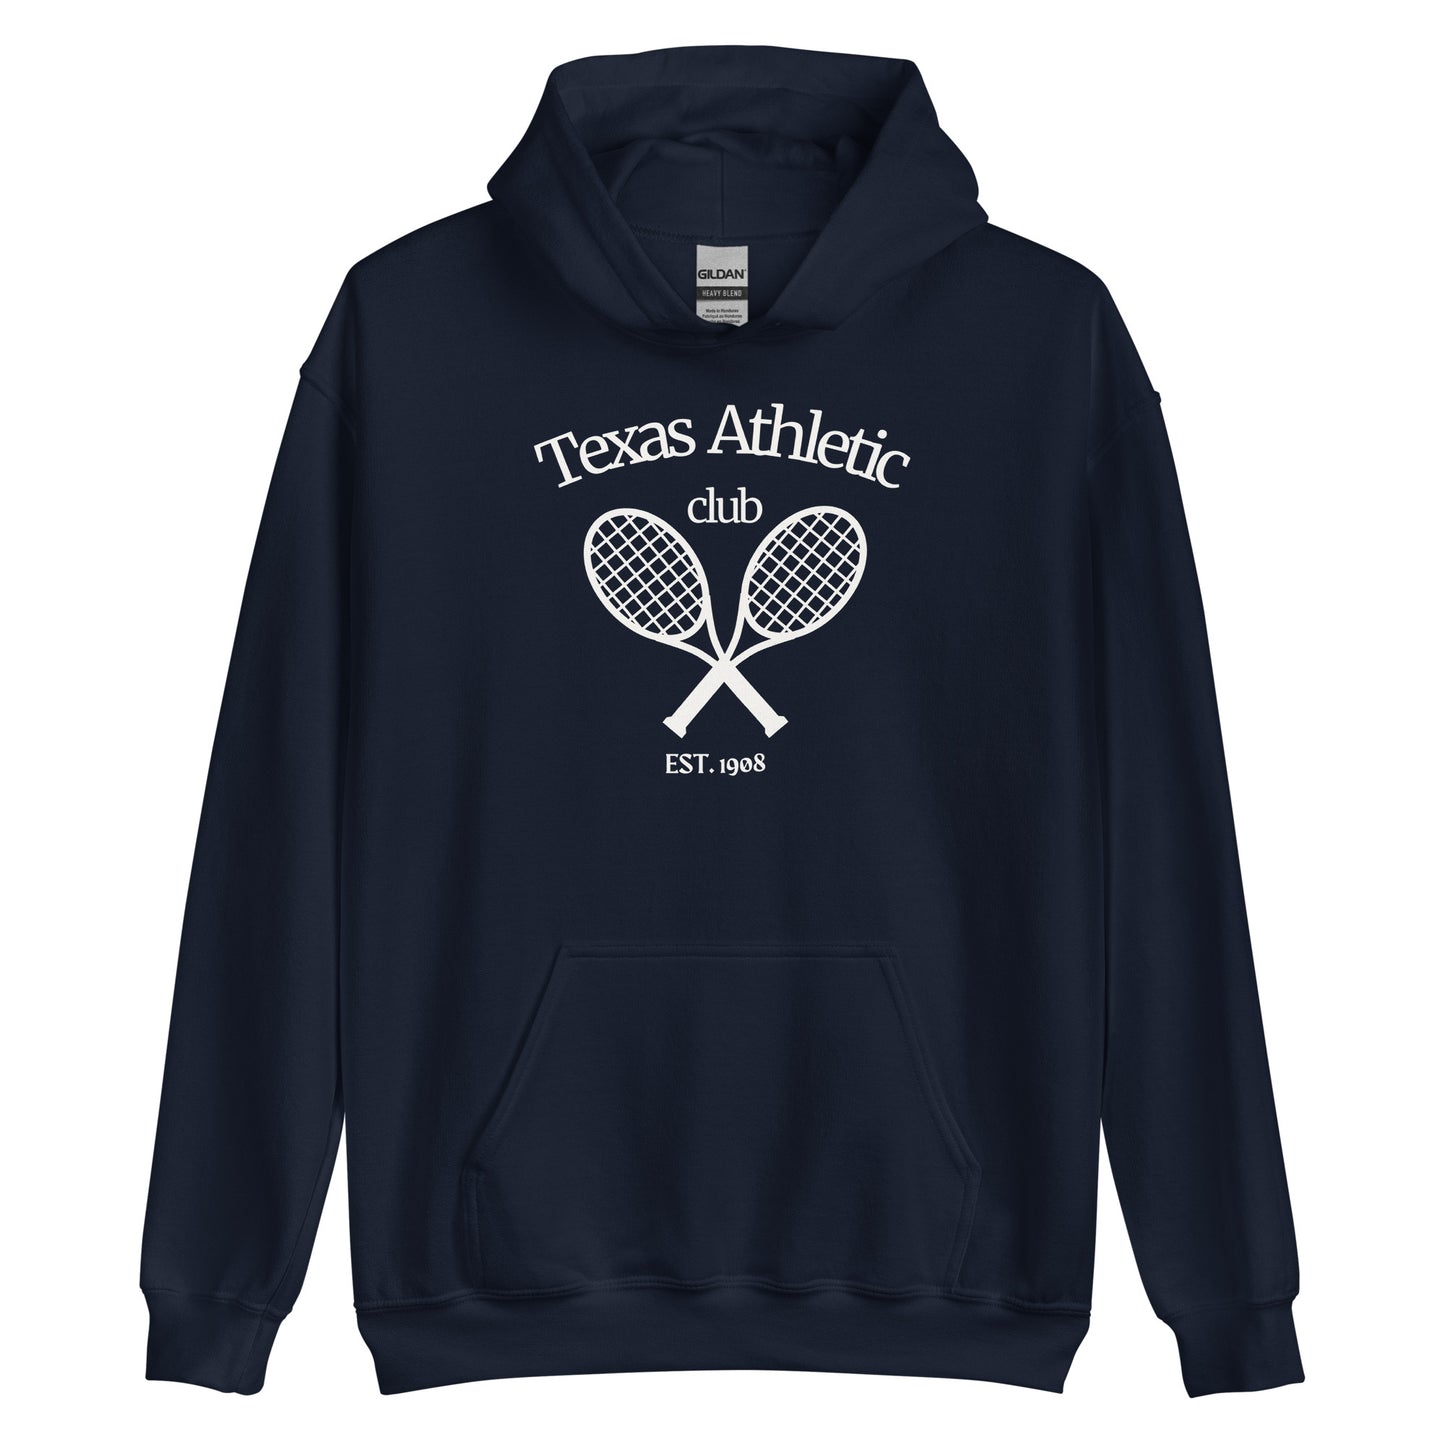 Navy Blue hoodie with white 'Texas Athletic Club' text and crossed tennis rackets graphic, front pouch pocket, ribbed cuffs and hem, displayed on a plain background.